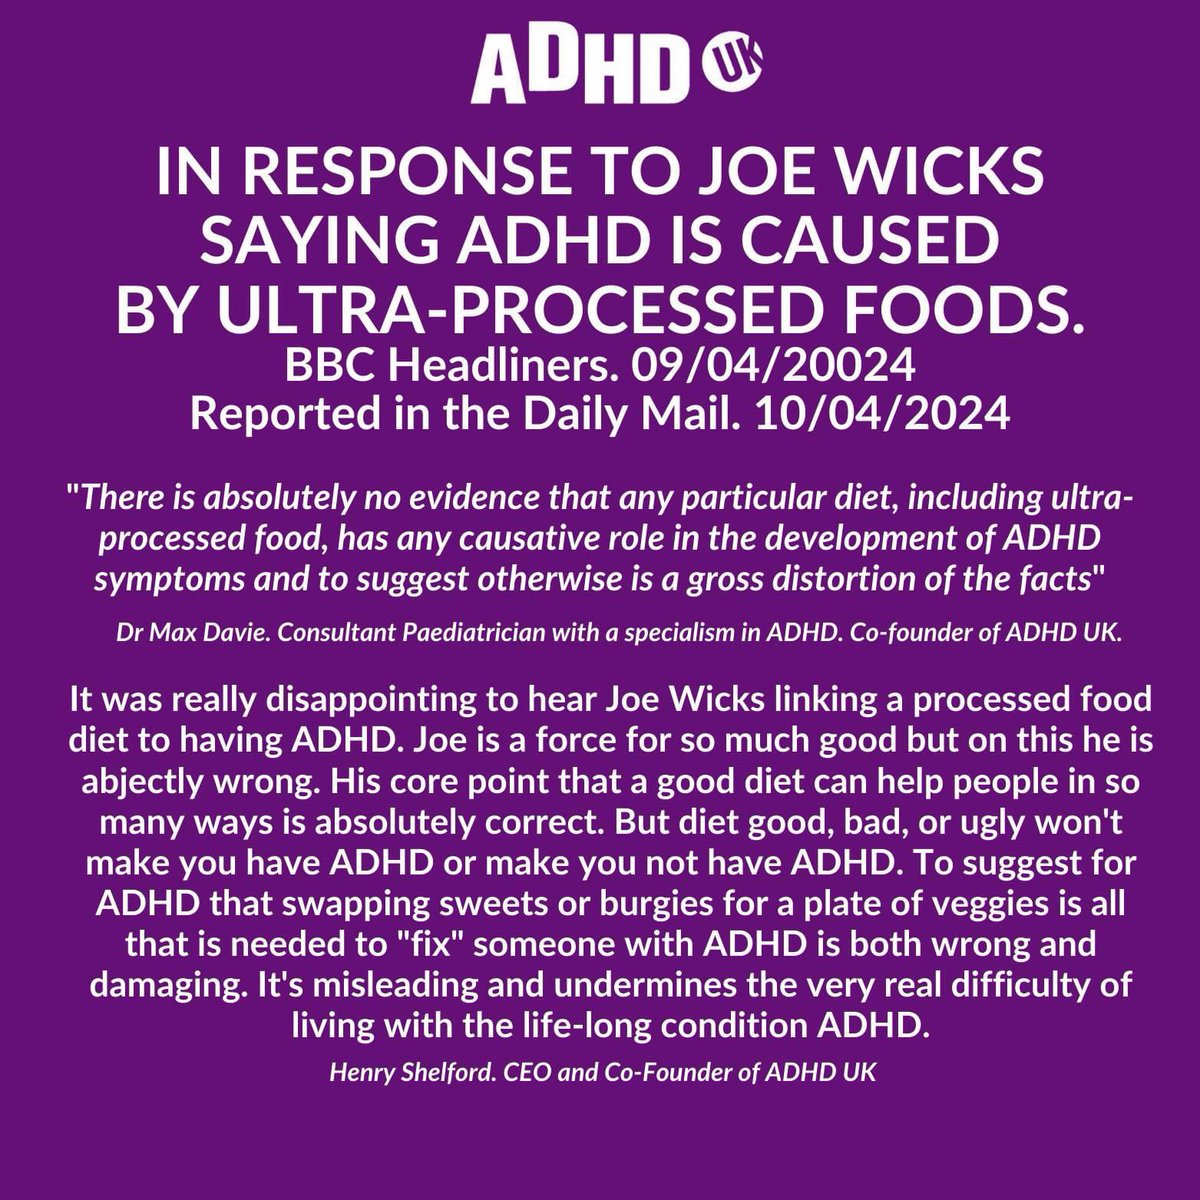 #ADHD What on earth possessed Joe Wicks to make such ill informed comments about a link between ADHD and UHPF - he does much good but sadly not on this occasion…😪